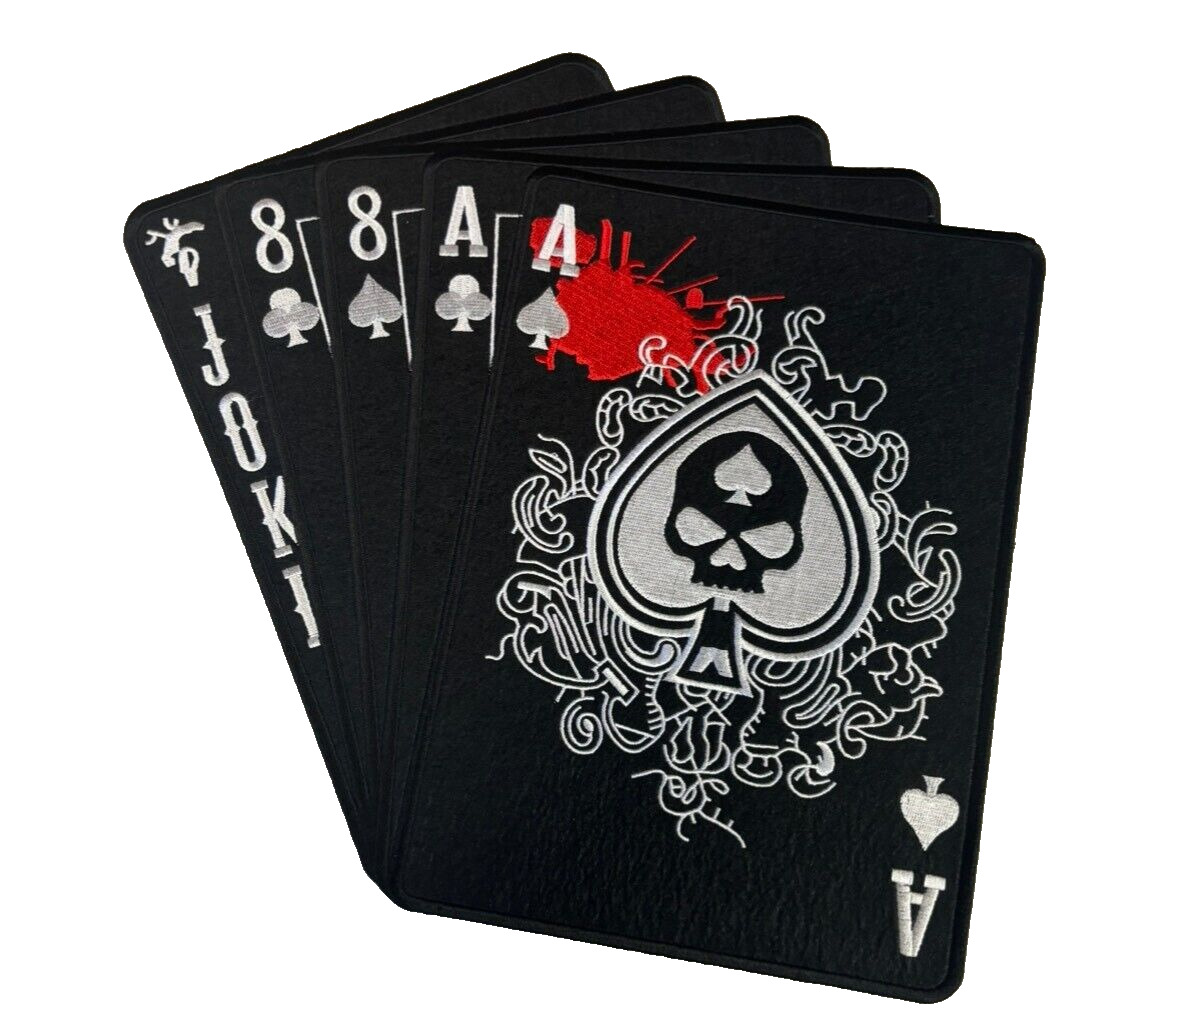 DEAD MANS HAND LARGE BACK BIKER IRON ON PATCH 12X11 INCH